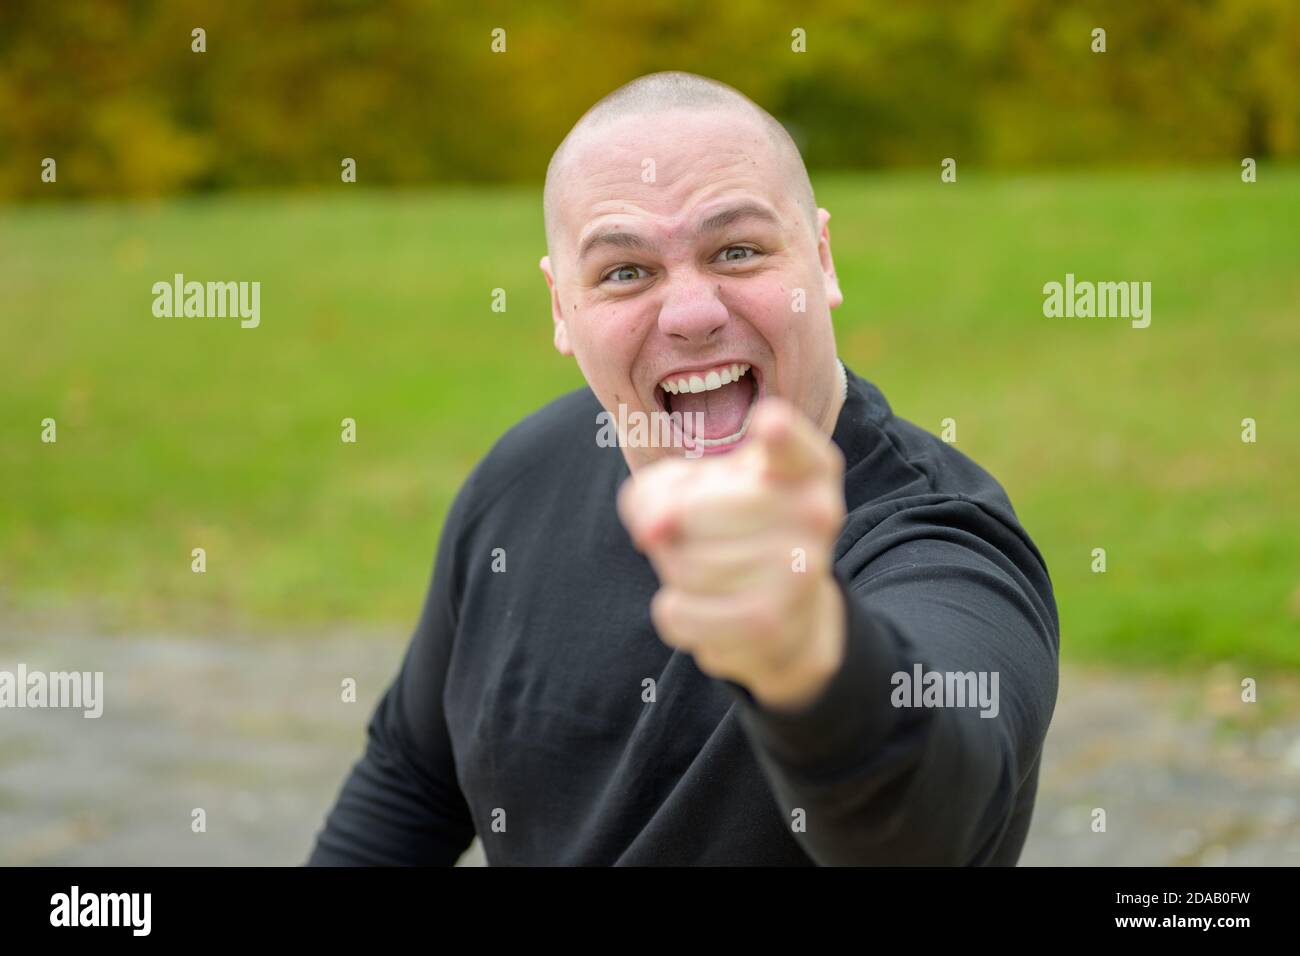 Emotional young man laughing or shouting at the camera while pointing his finger with focus to his face outdoors in a park Stock Photo